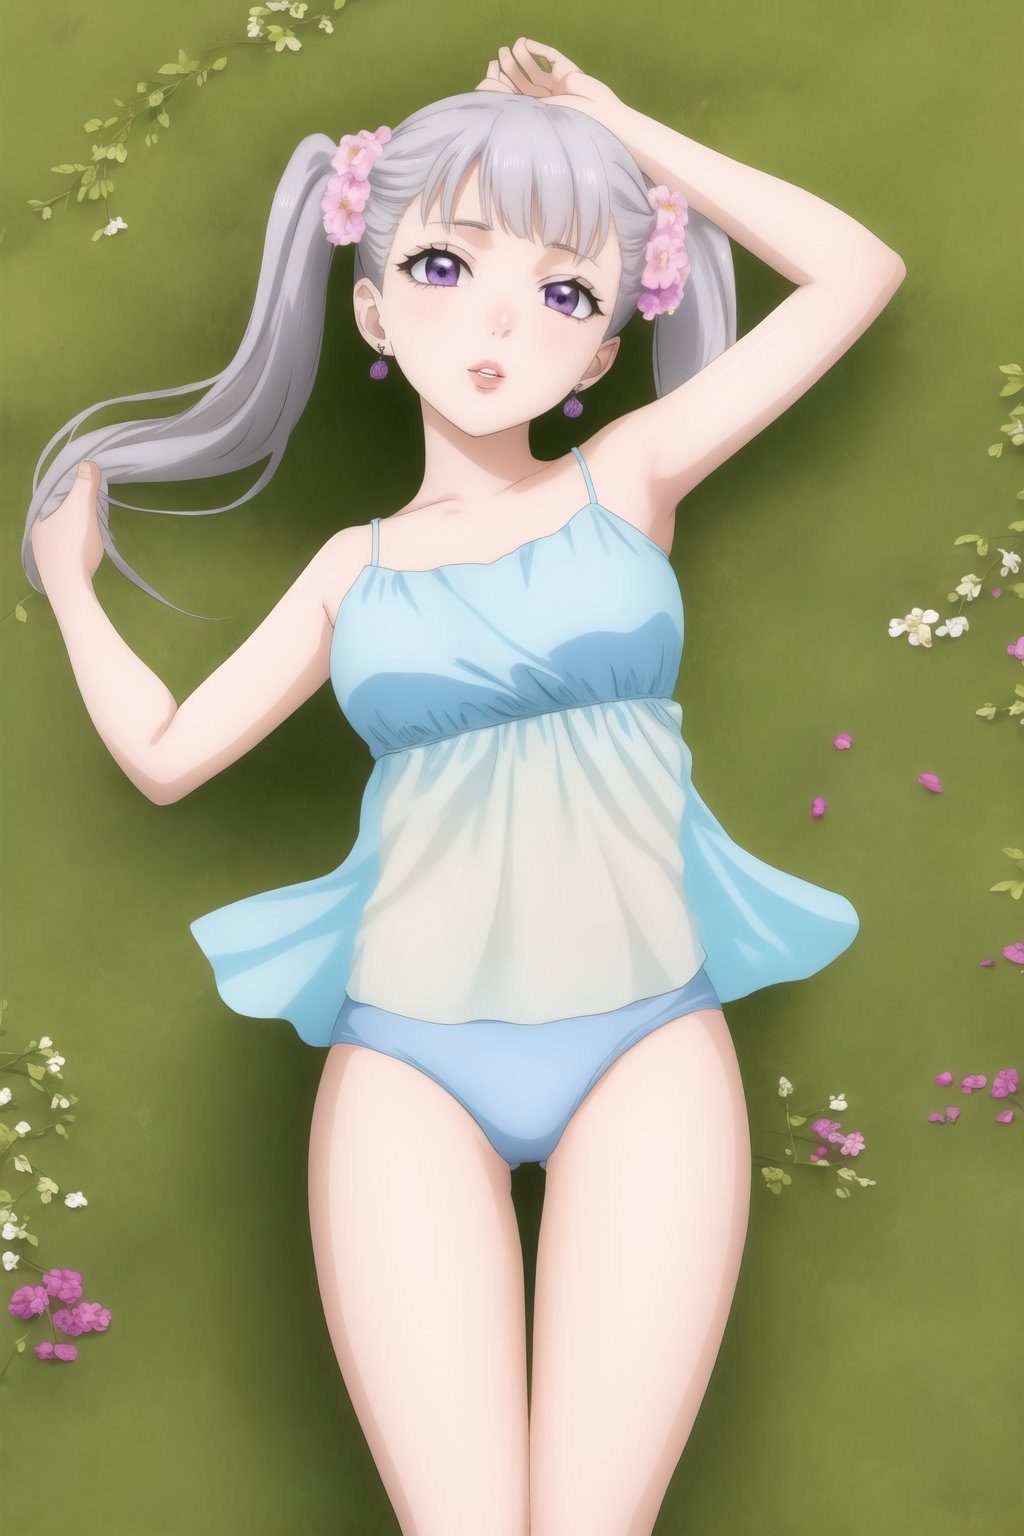 masterpiece, best quality, highres,Sexy, noelle_silva, dreamy purple eyes, earrings, with astounding soft skin and soft pale body, body covered in noelles flowers, (twintail silver hair:1.05), sensual look, looking at you, lips, lying on a field of noelles, fulll body, frontal view, strange fashion Women'sday_theme (Professional illustration)